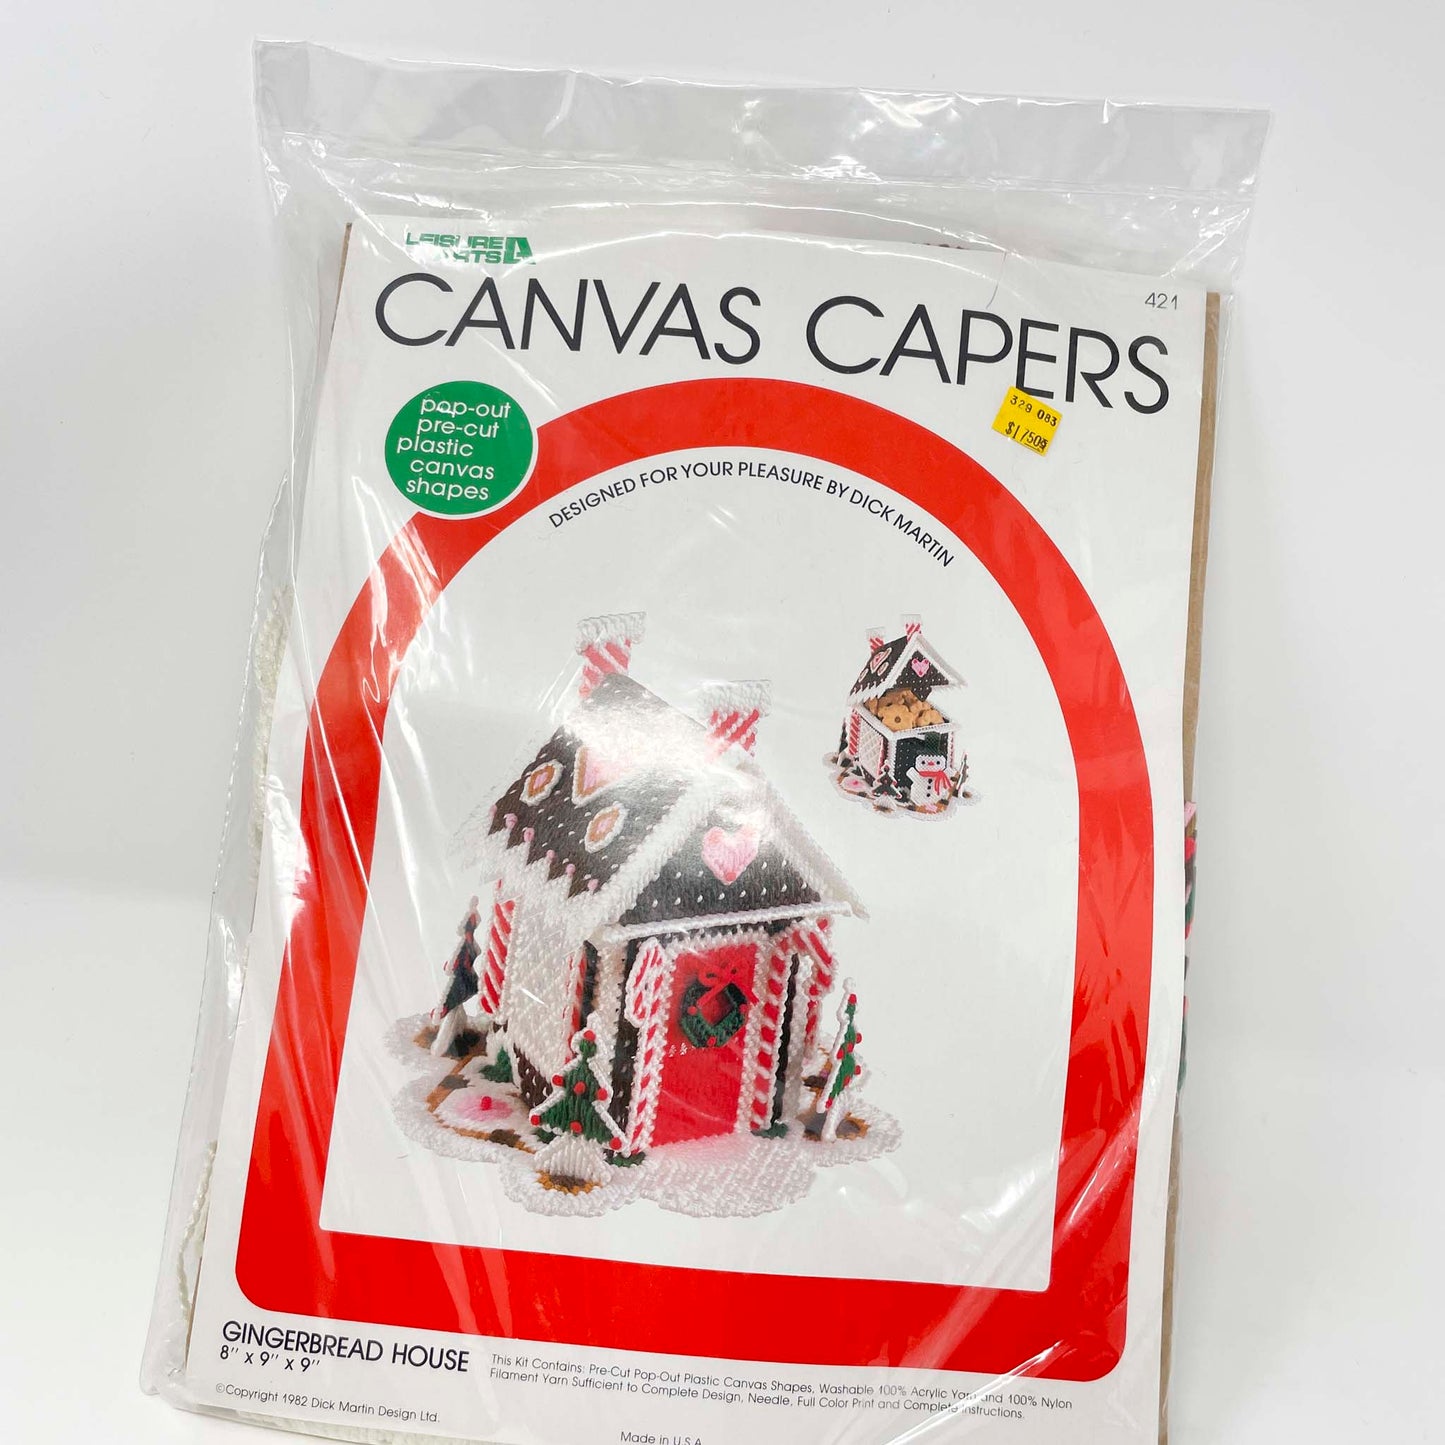 Vintage Leisure Arts Canvas Capers Gingerbread House Kit